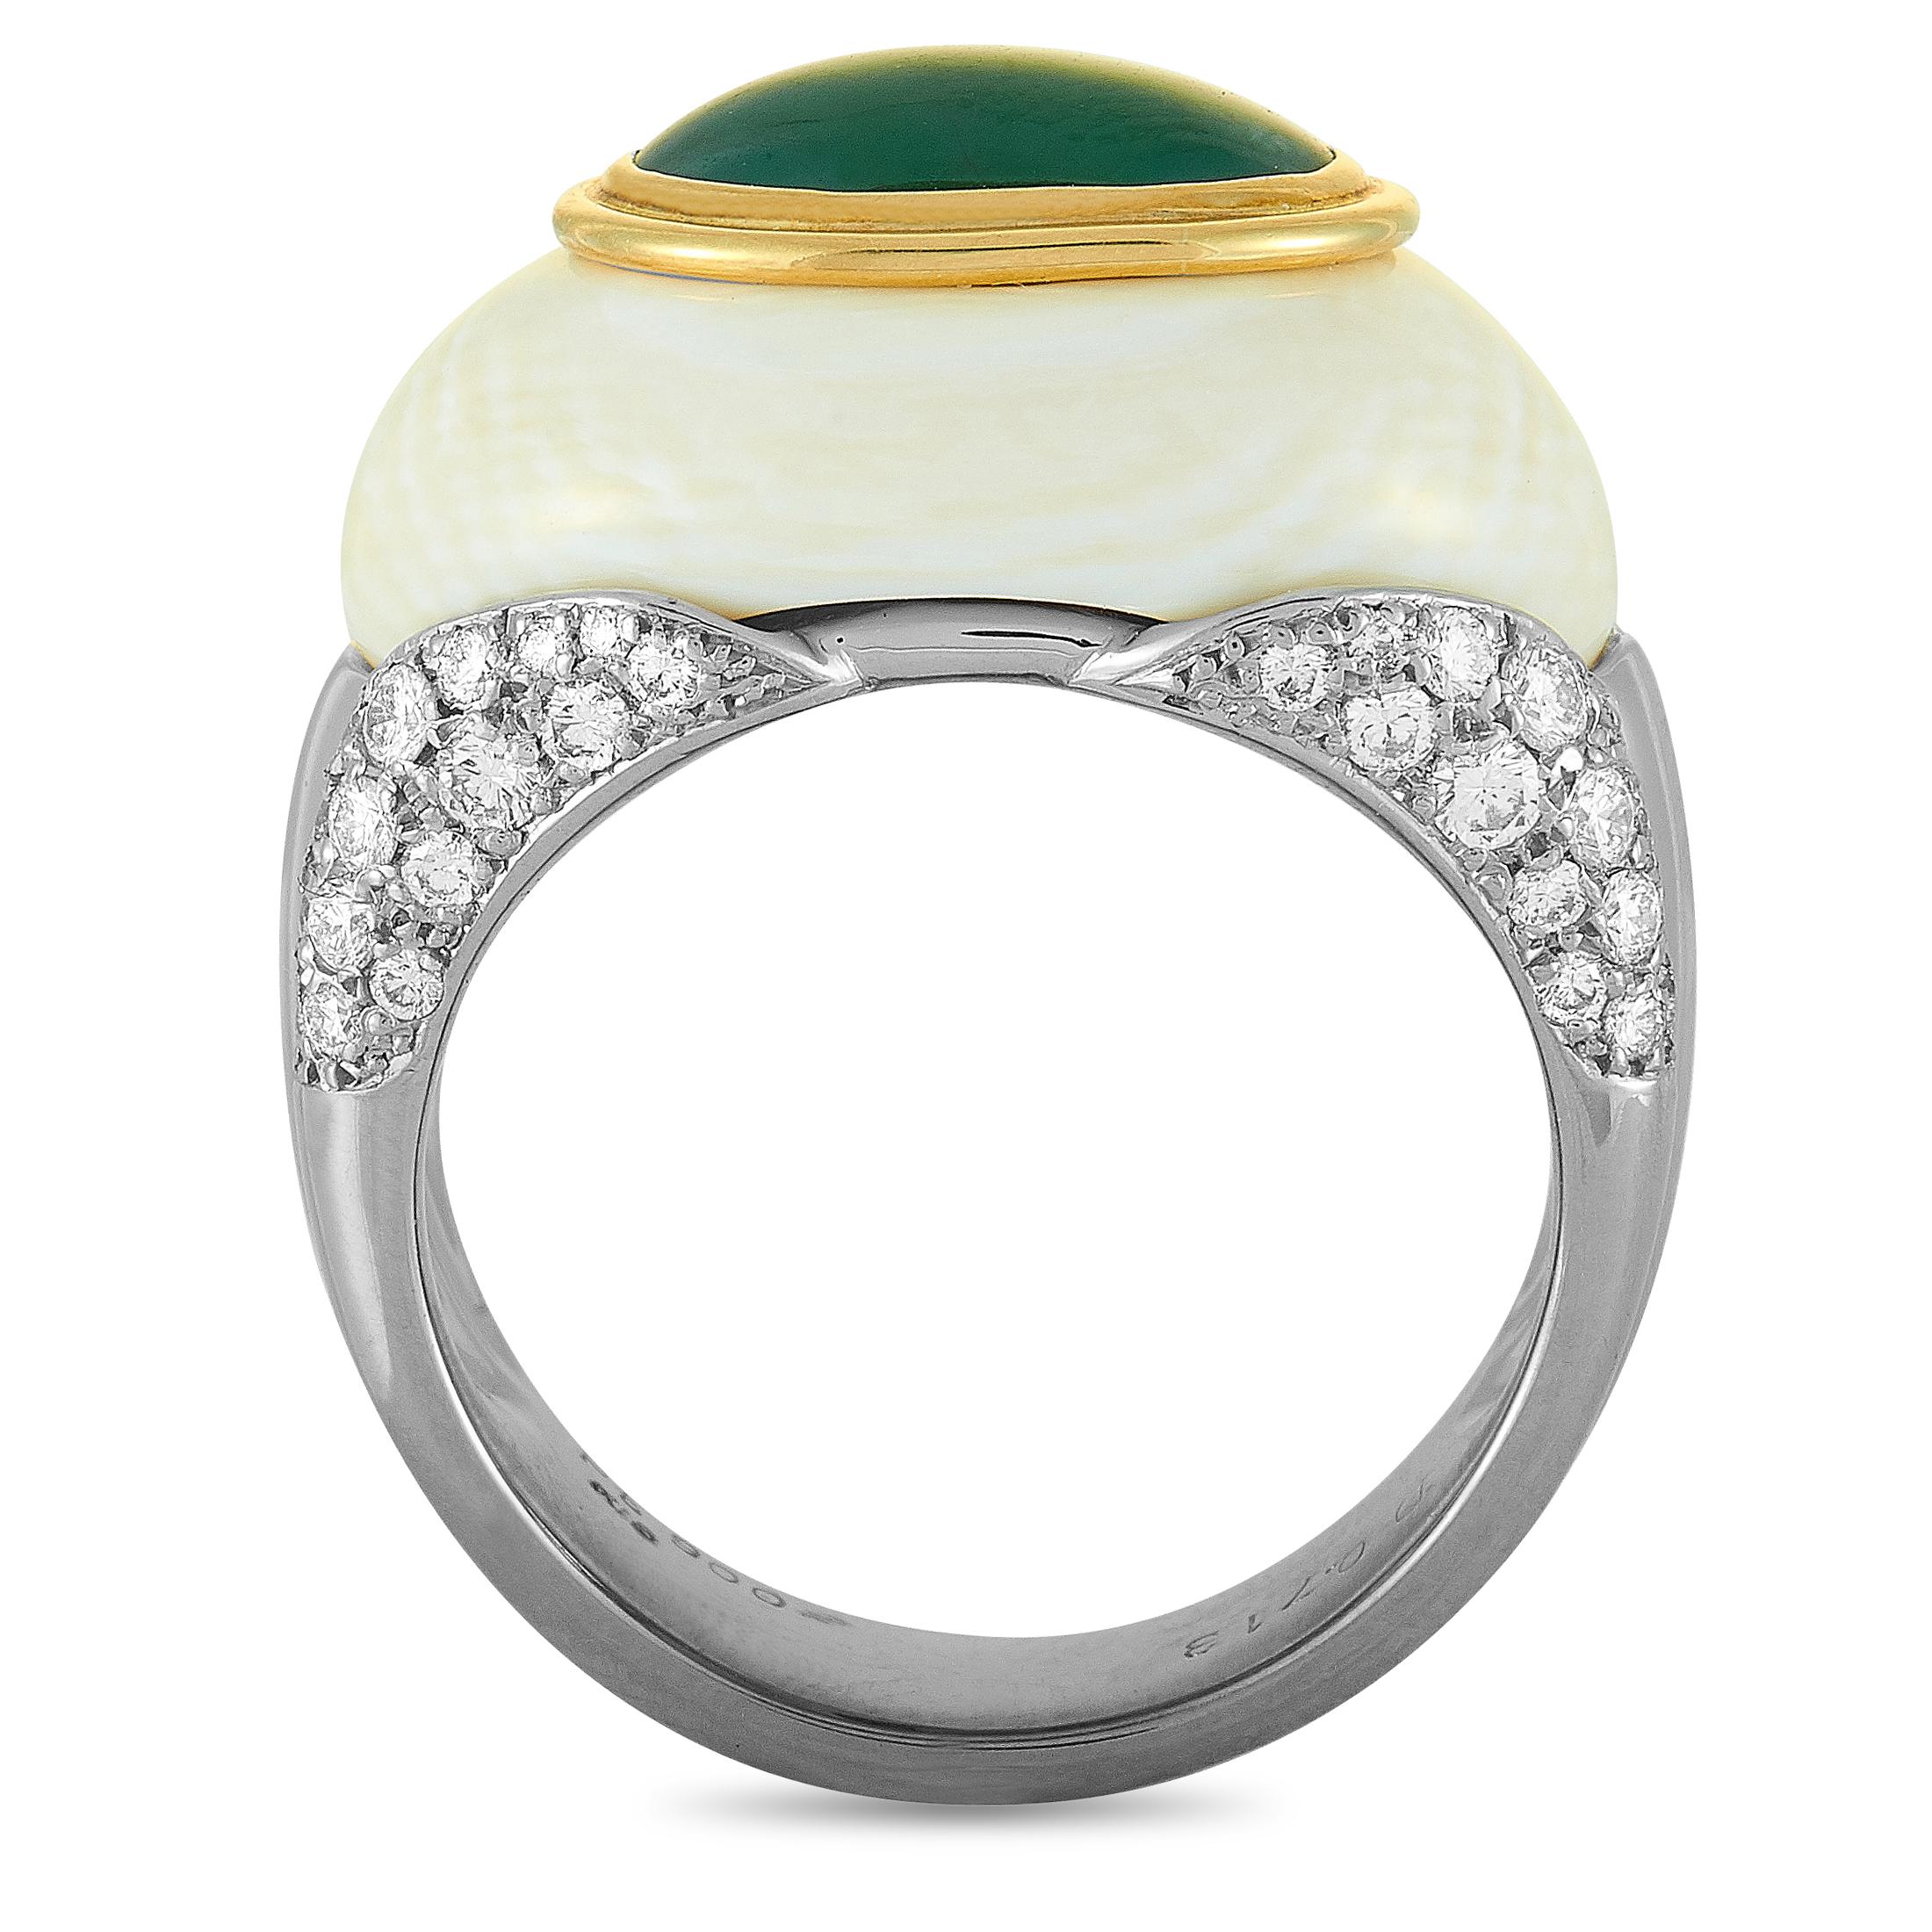 This LB Exclusive ring is made of platinum and set with white coral, a jade, and a total of 0.71 carats of diamonds. The ring weighs 17.5 grams, boasting band thickness of 6 mm and top height of 10 mm, while top dimensions measure 20 by 13 mm.
Ring